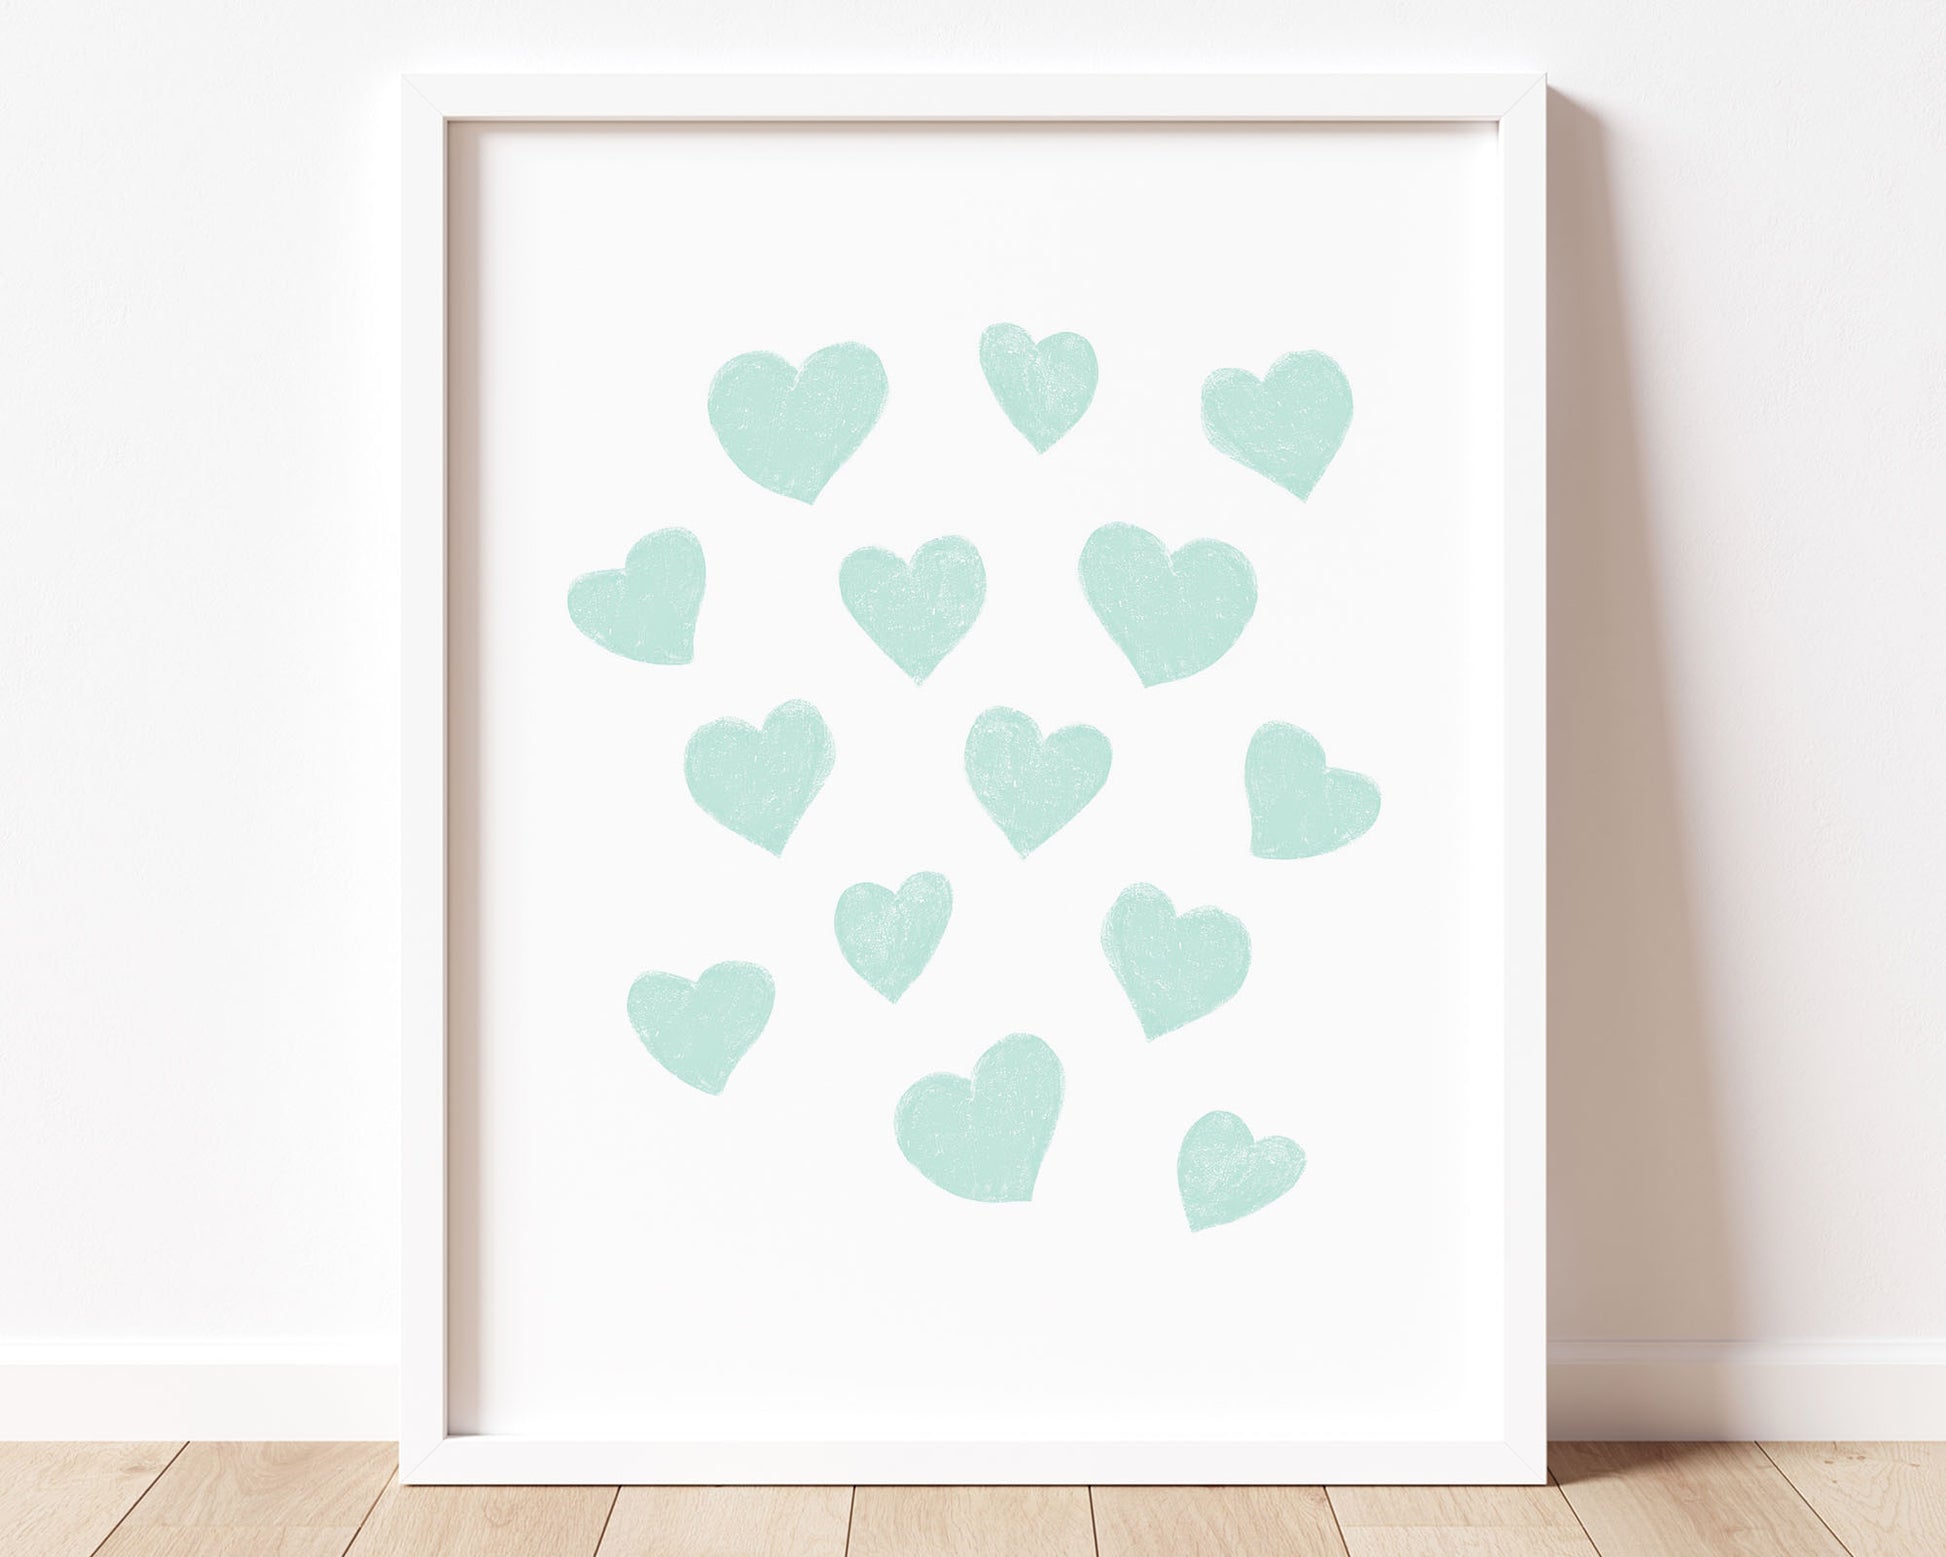 Mint green small scattered hearts in chalky brushstroke illlustration style perfect for Baby Nursery Décor, Little Boys Bedroom Wall Art, Toddler Girls Room Wall Hangings, Kiddos Bathroom Wall Art and Childrens Playroom Décor.